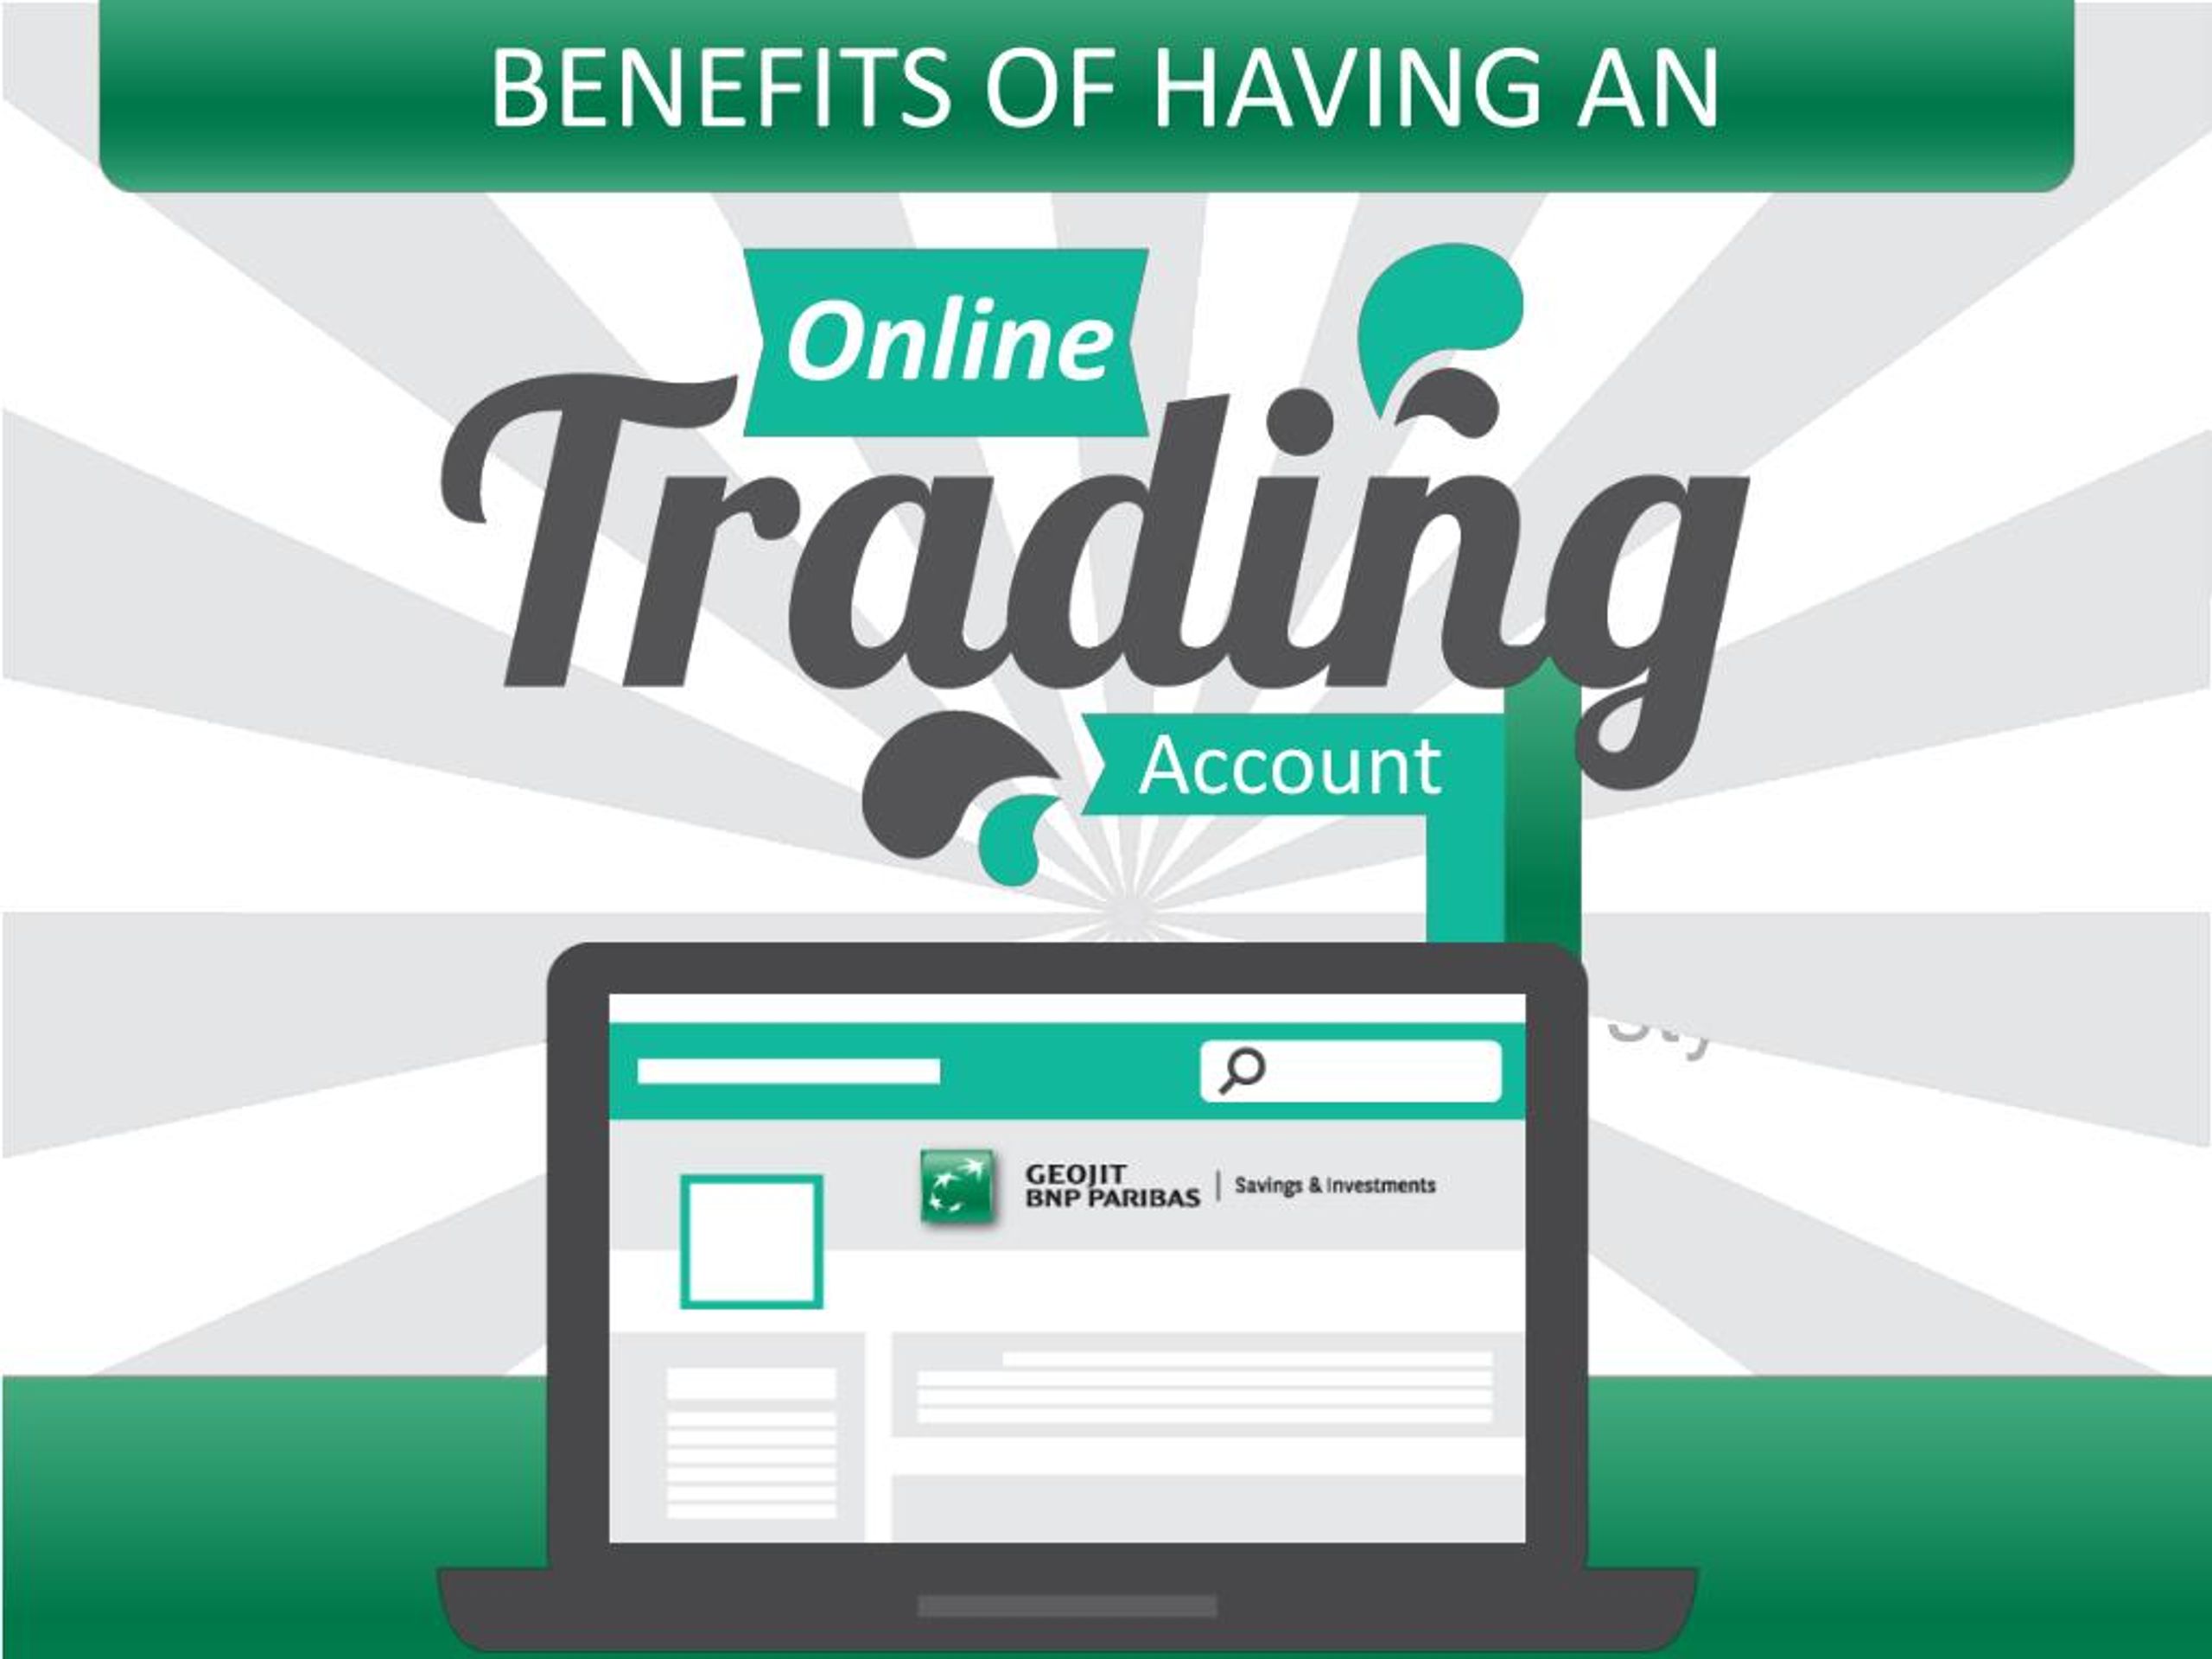 PPT - Benefits of Online Trading Account - Geojit BNP ...